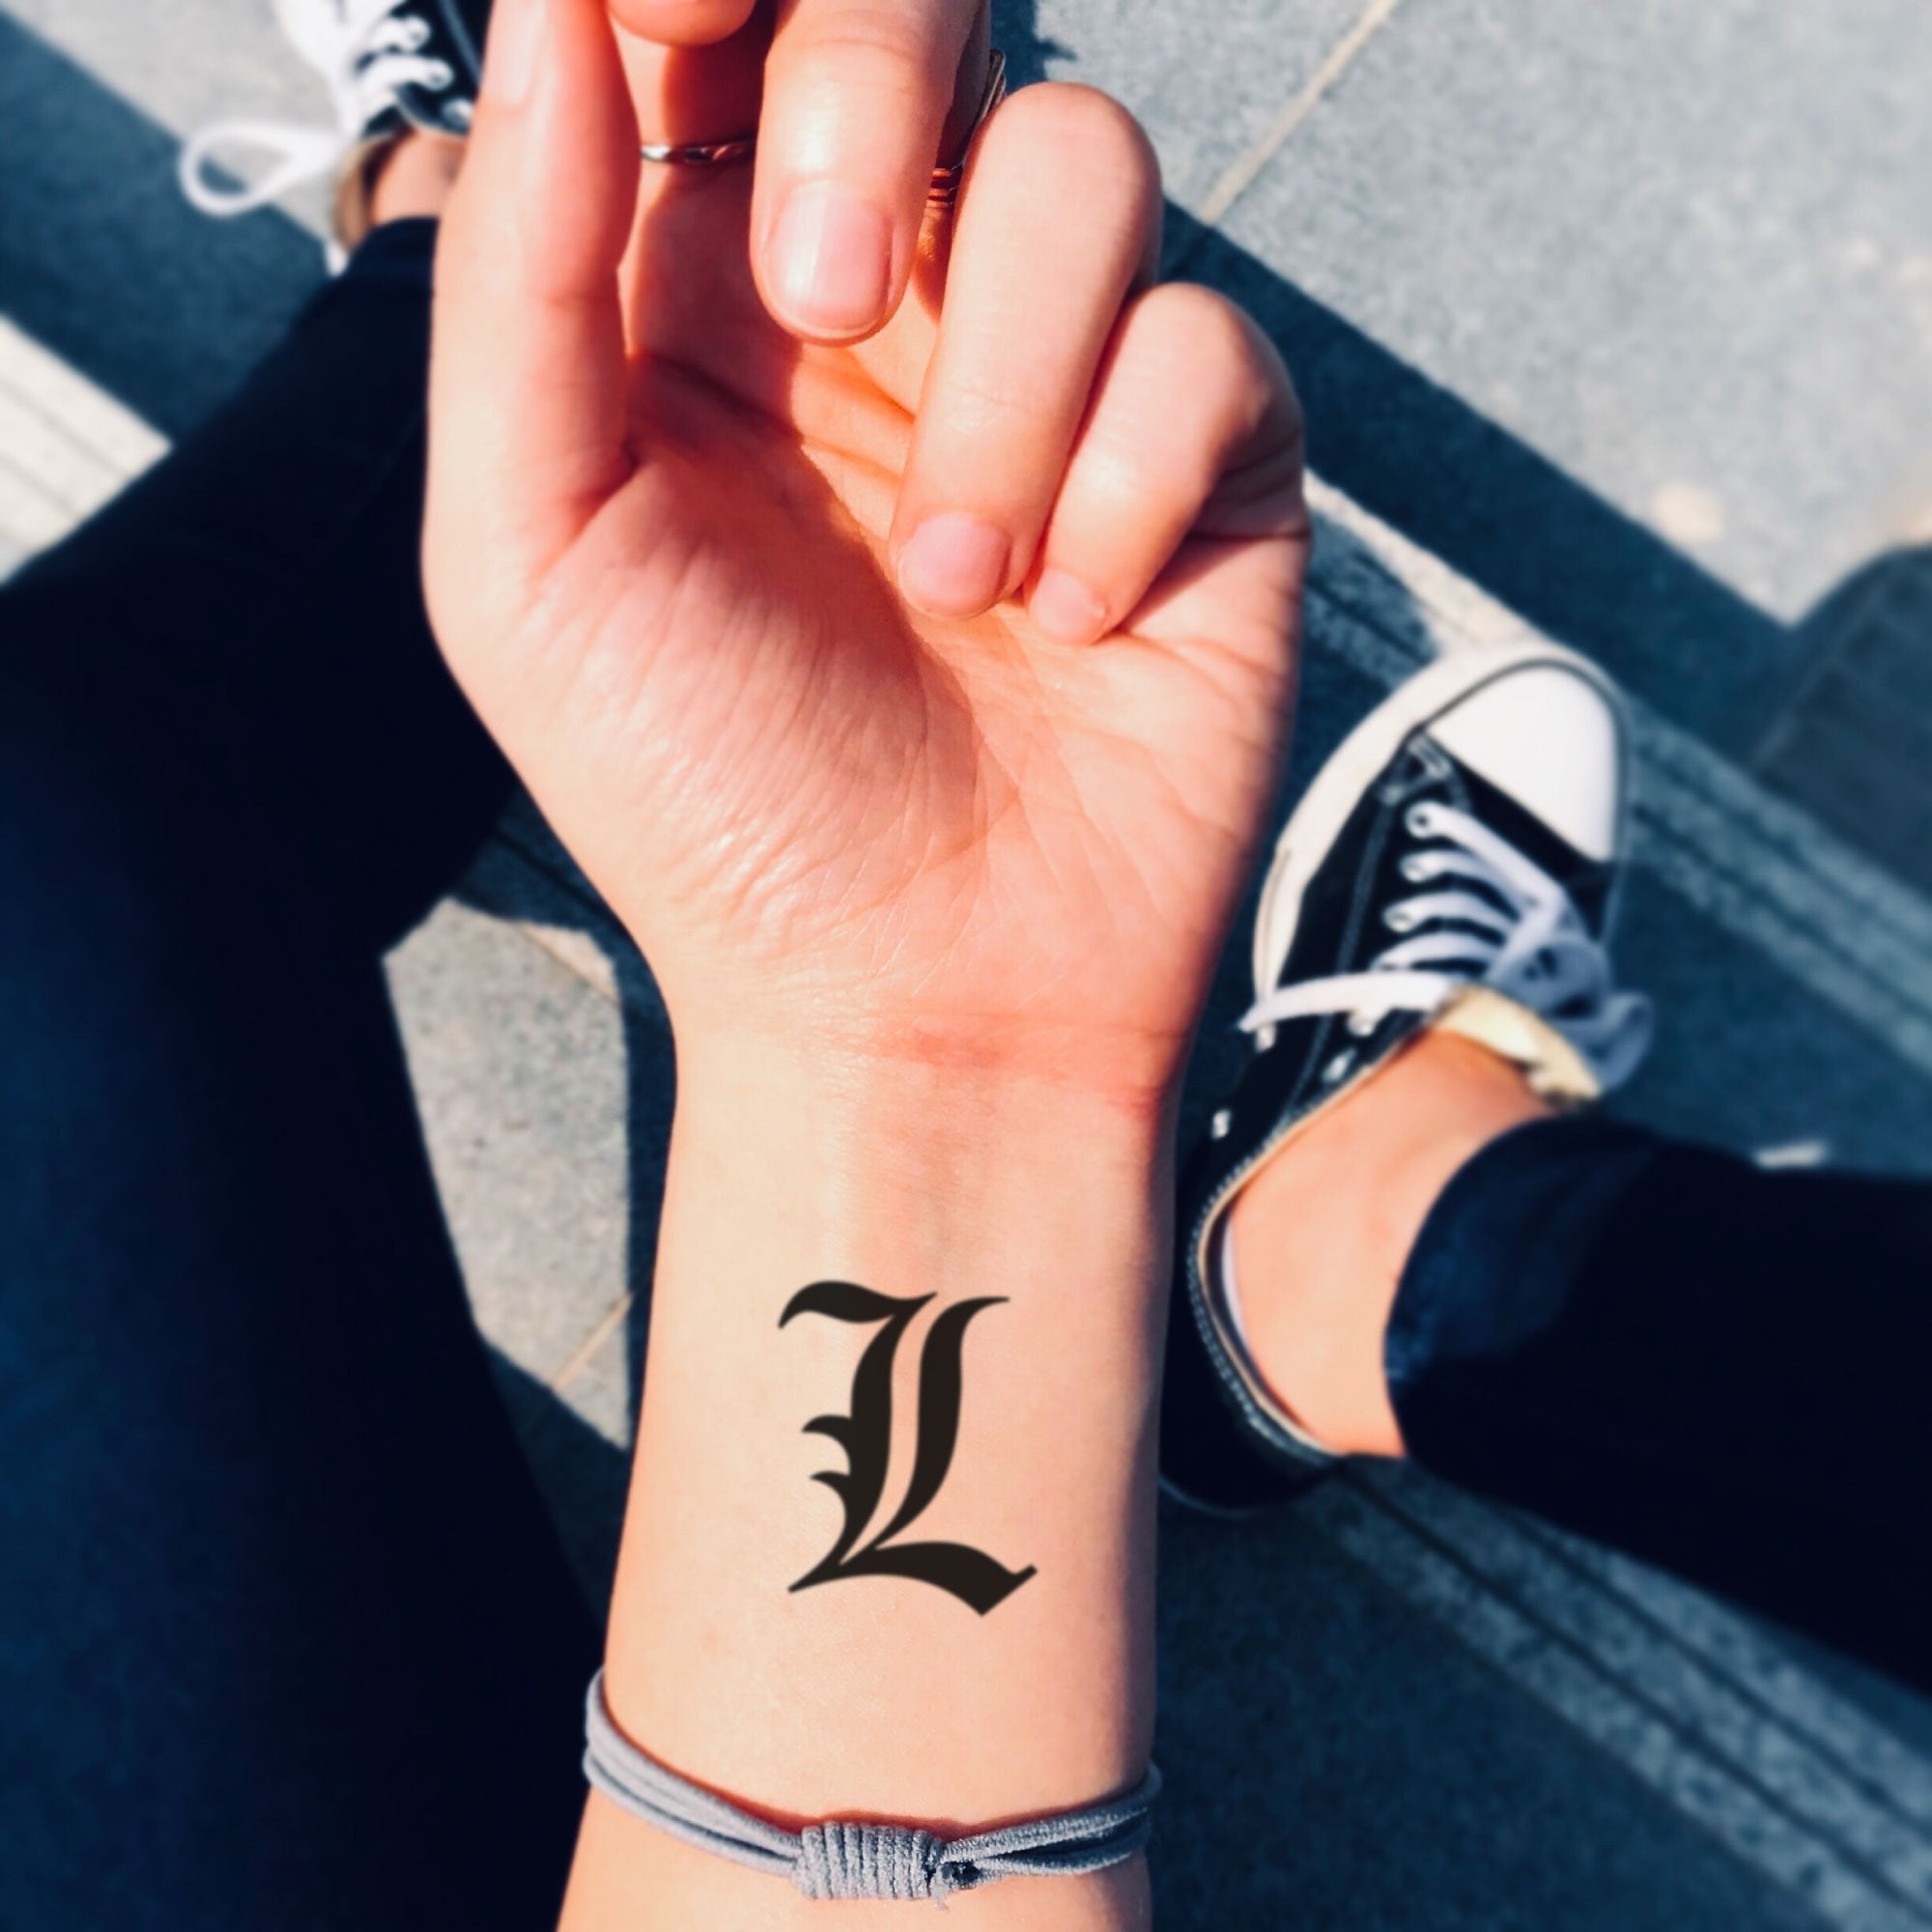 40 Letter L Tattoo Designs, Ideas and Templates - Tattoo Me Now | L tattoo, Letter  l tattoo, Tattoo designs